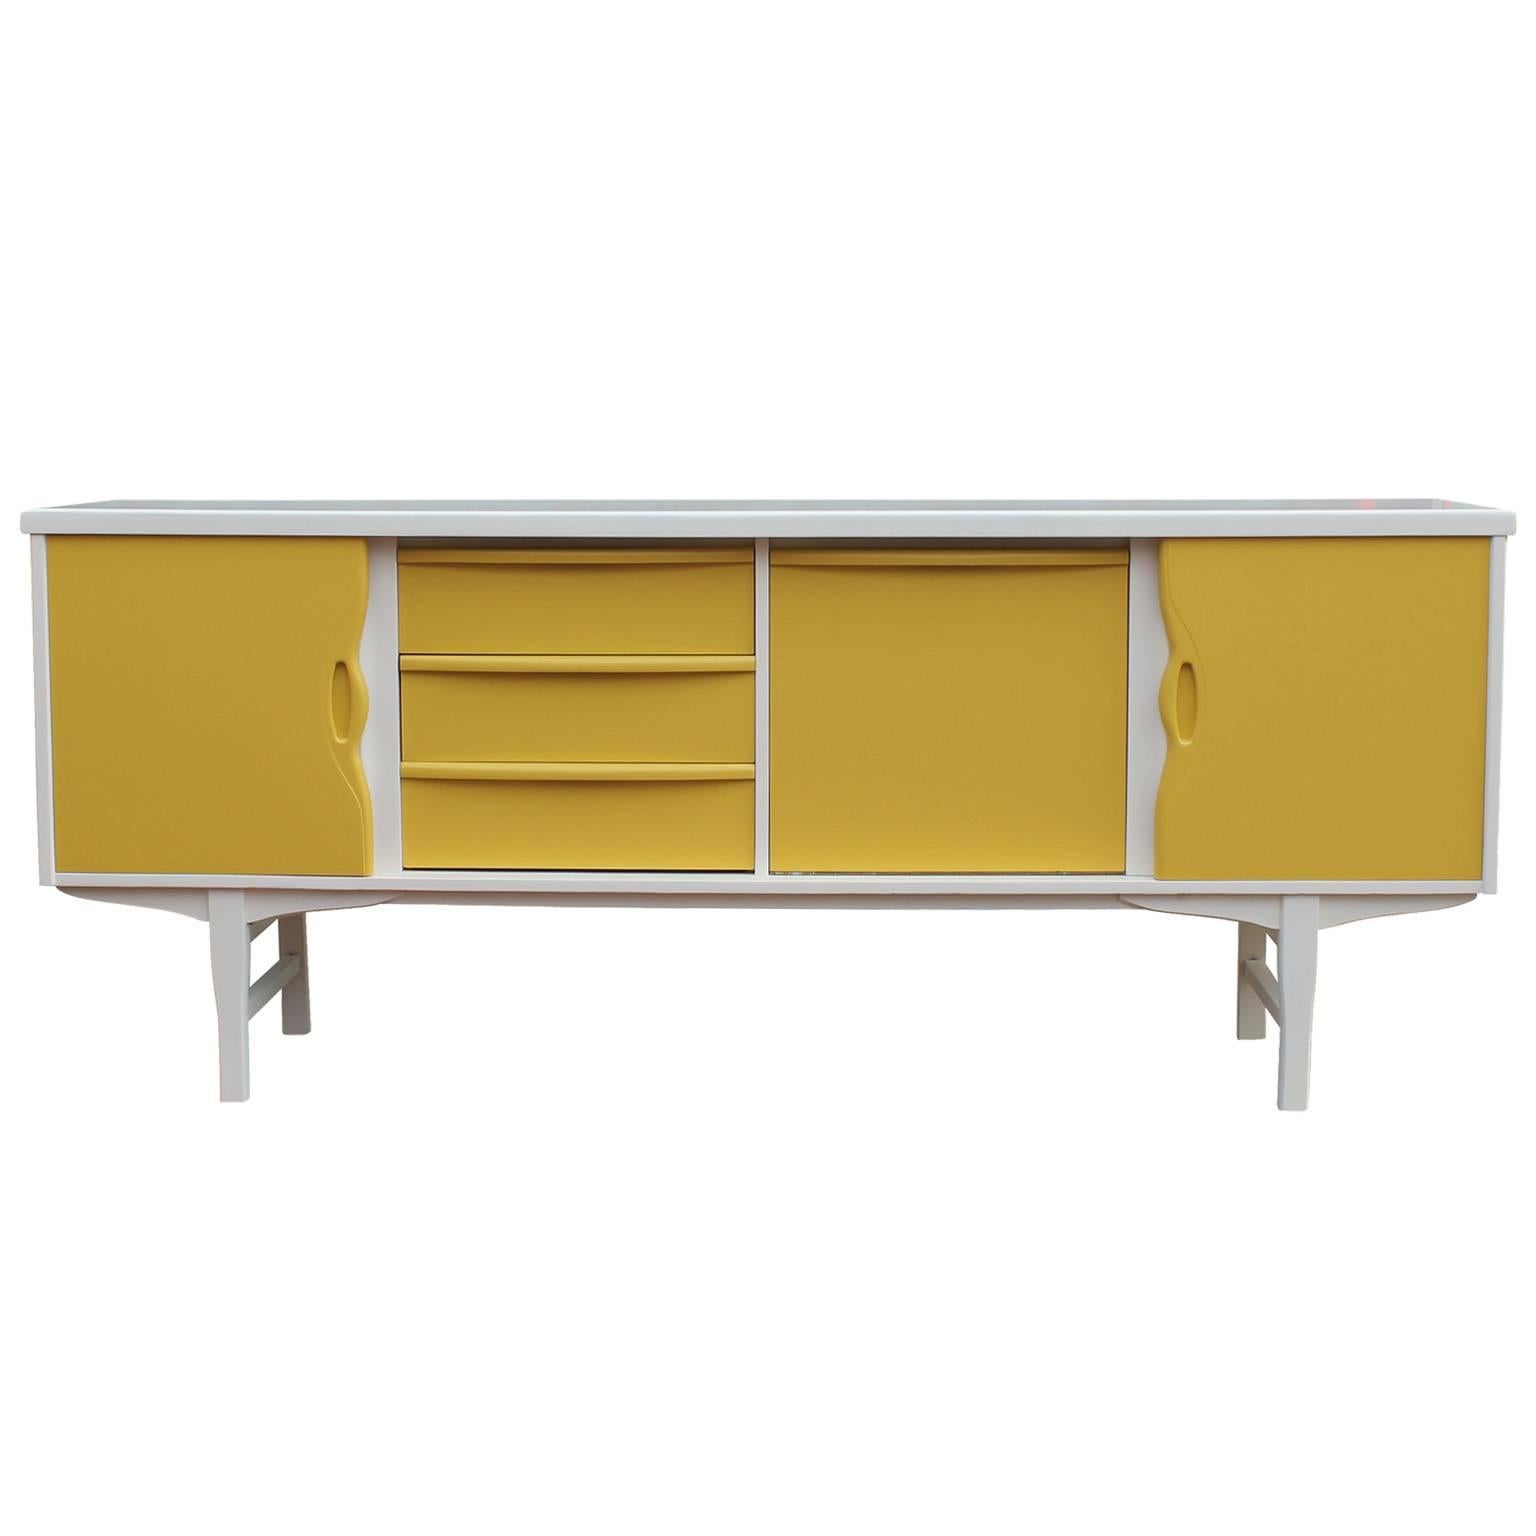 Stunning credenza freshly lacquered in cream and mustard colors. Two sliding doors open to reveal a single shelf. A drop down door hides bar space complete with mirror and glass shelf. Three Drawers provide additional storage; top is slotted for